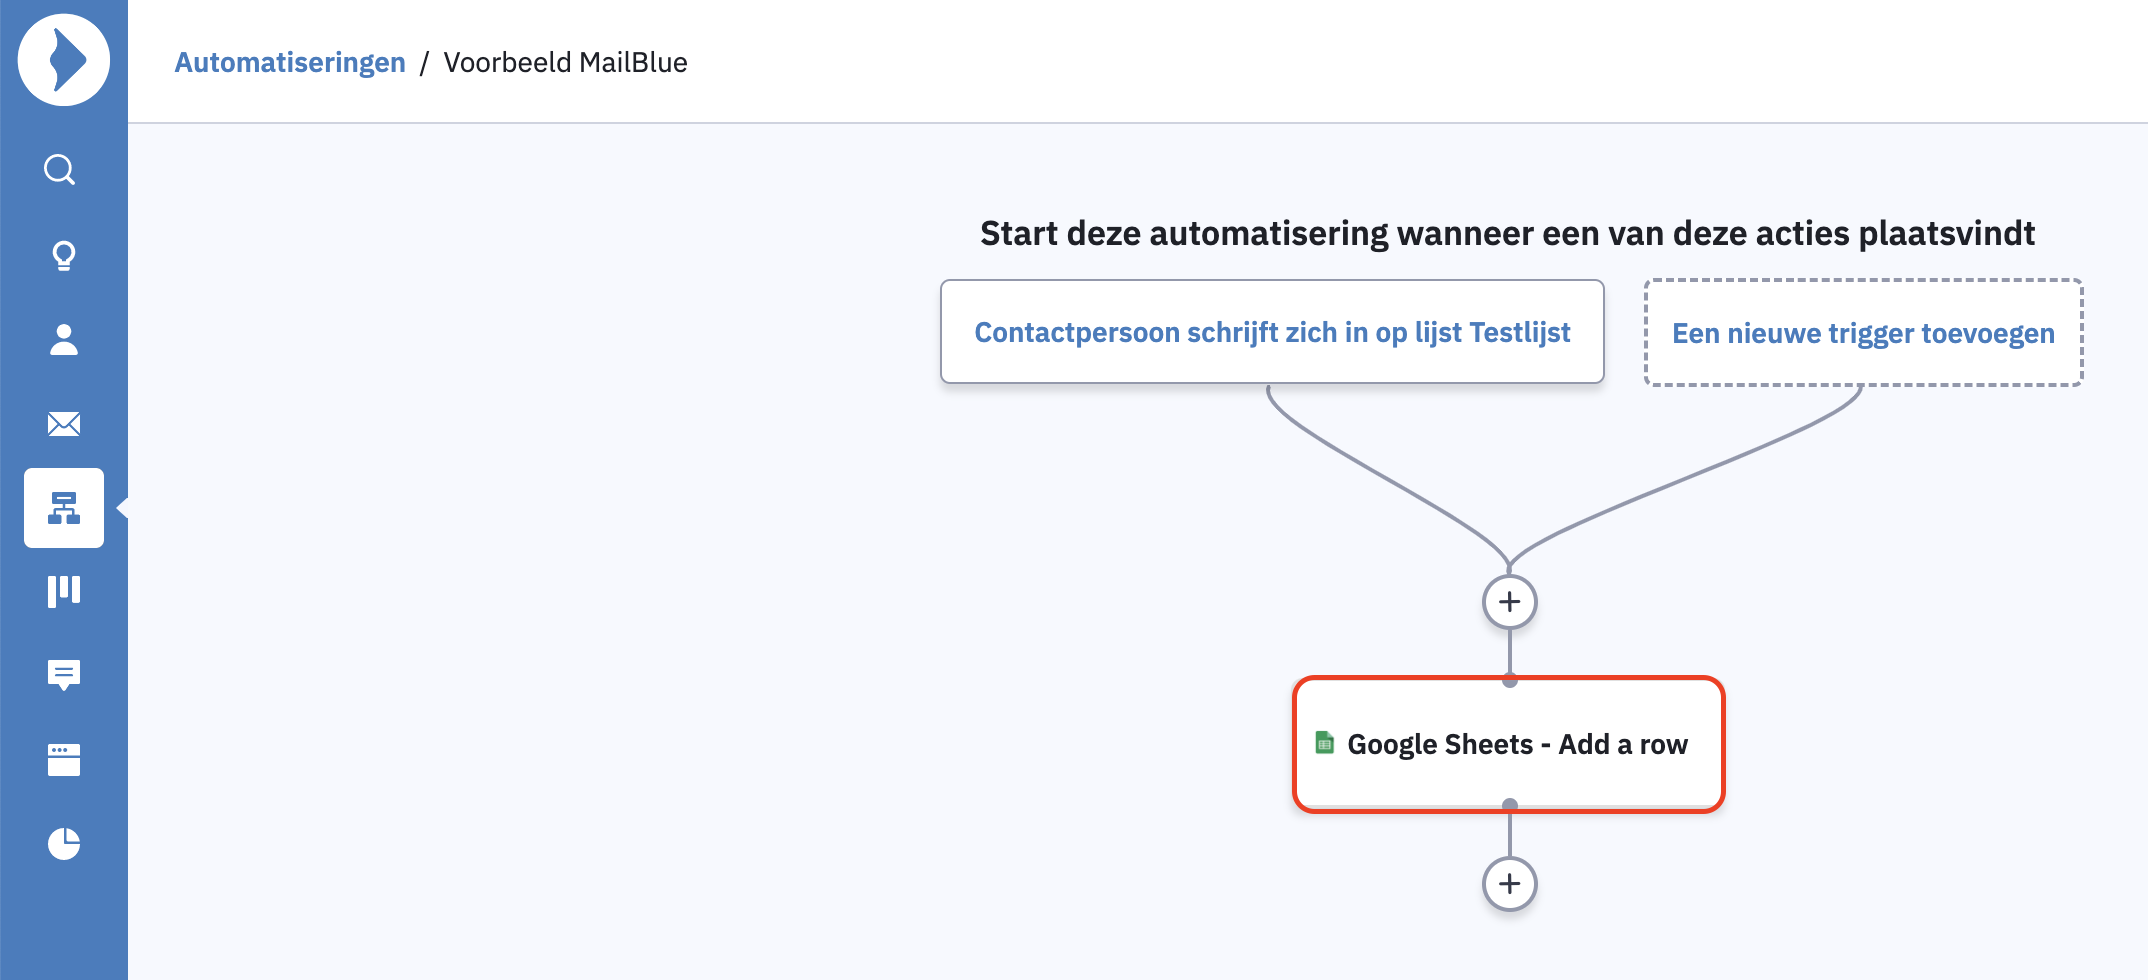 Google_Spreadsheet-add-a-row-actie-automatisering.png